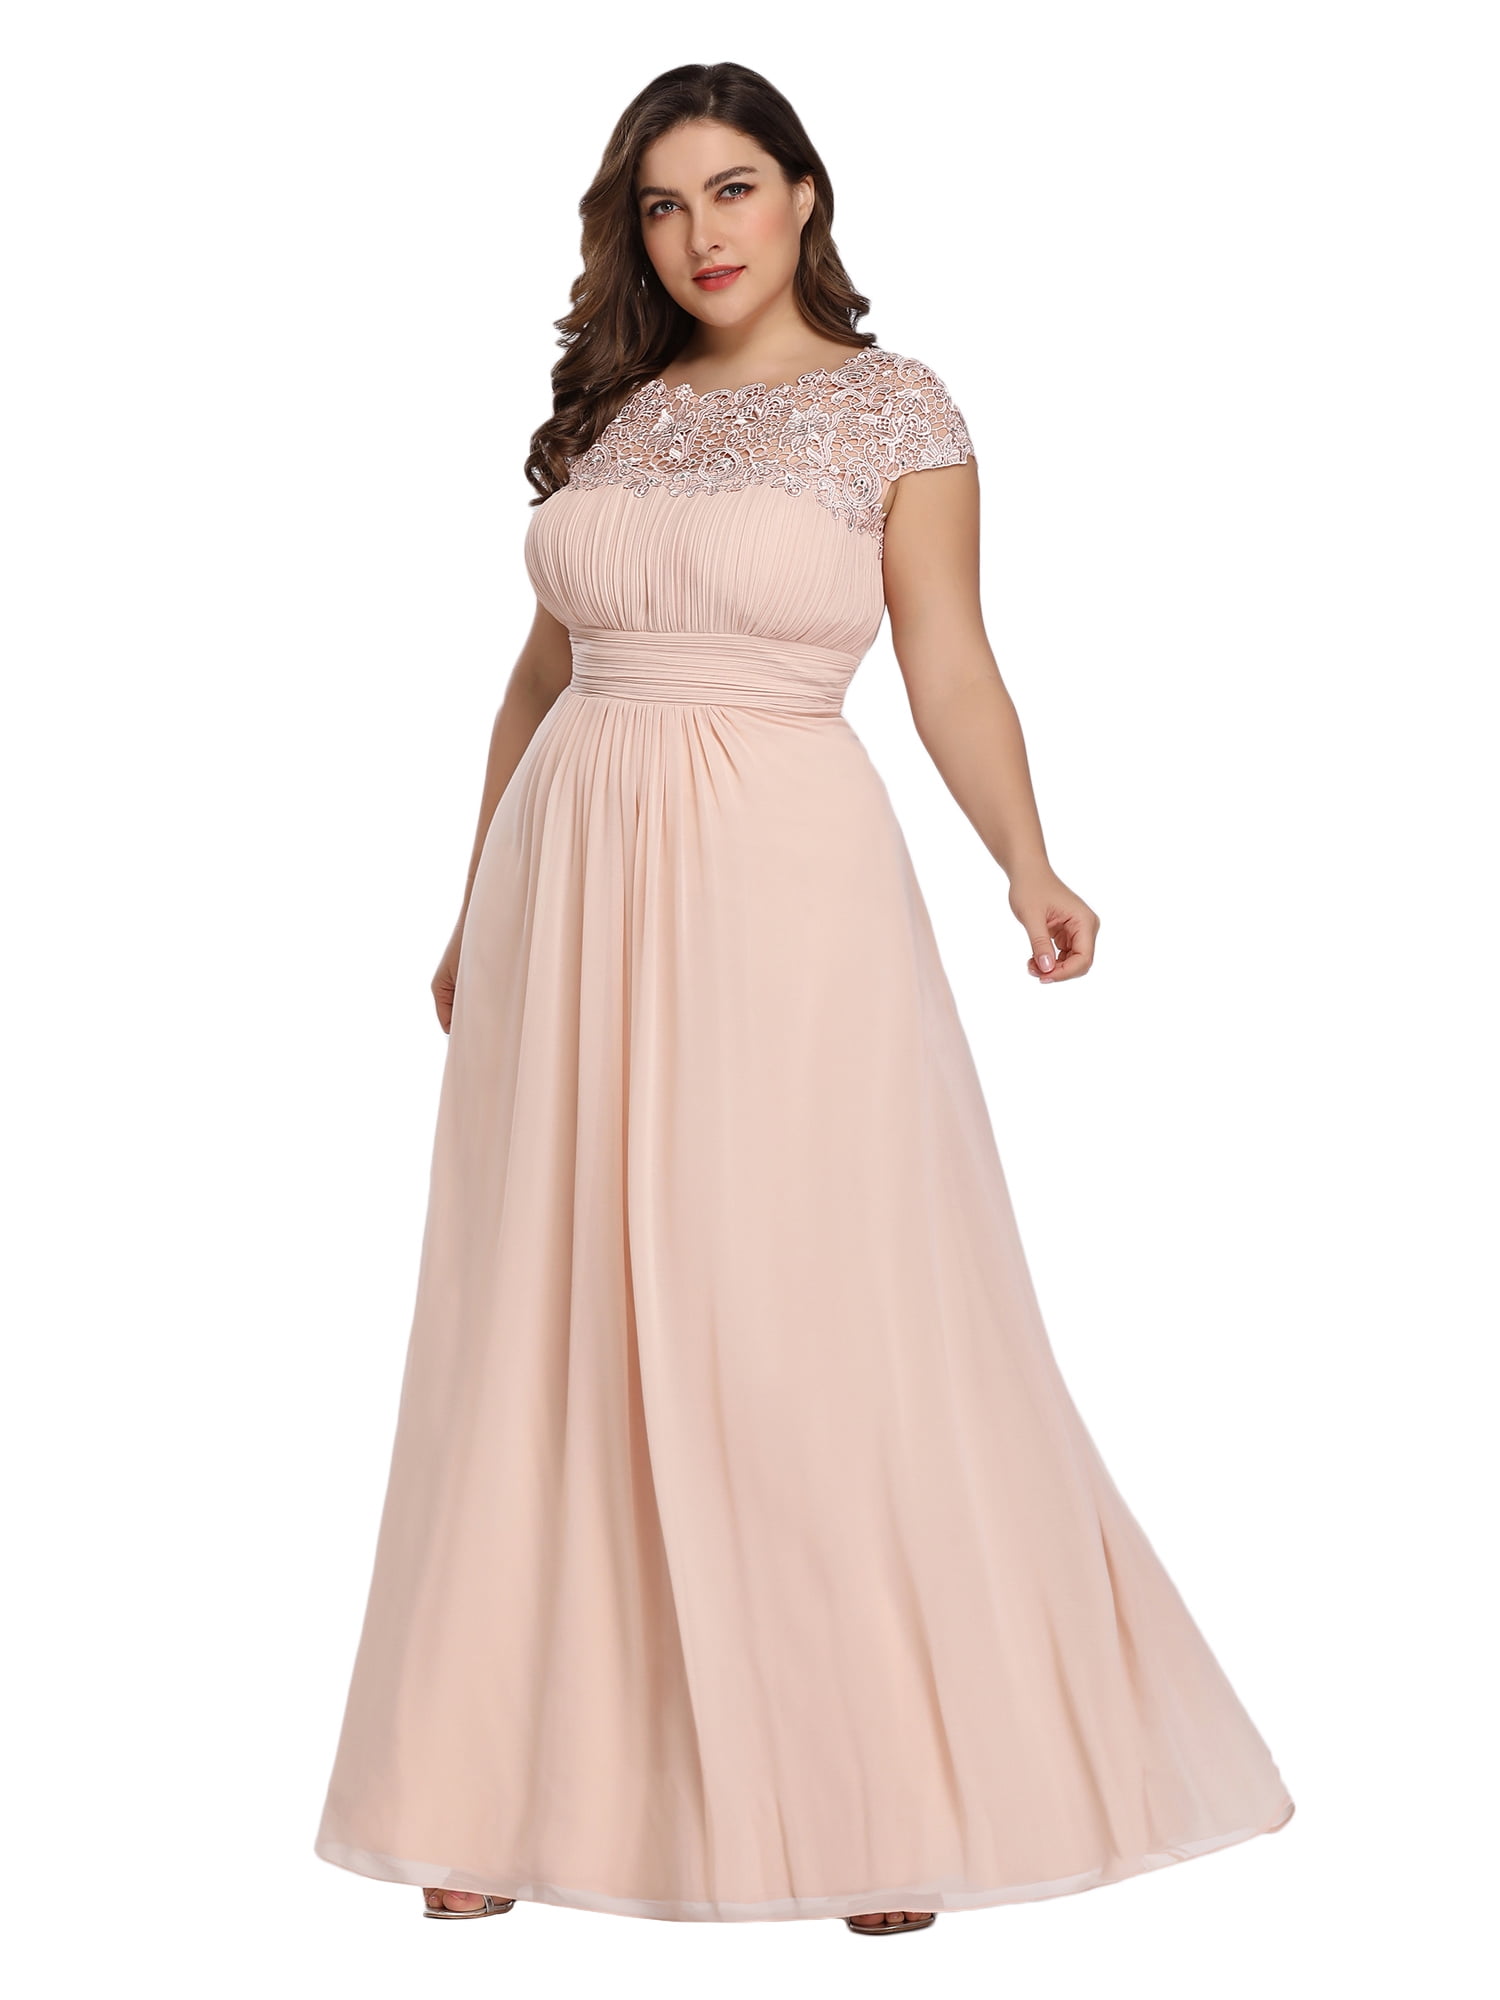 Ever-Pretty Plus Size Formal Gown Long Holiday Beach Blush Wedding Dresses 09993 